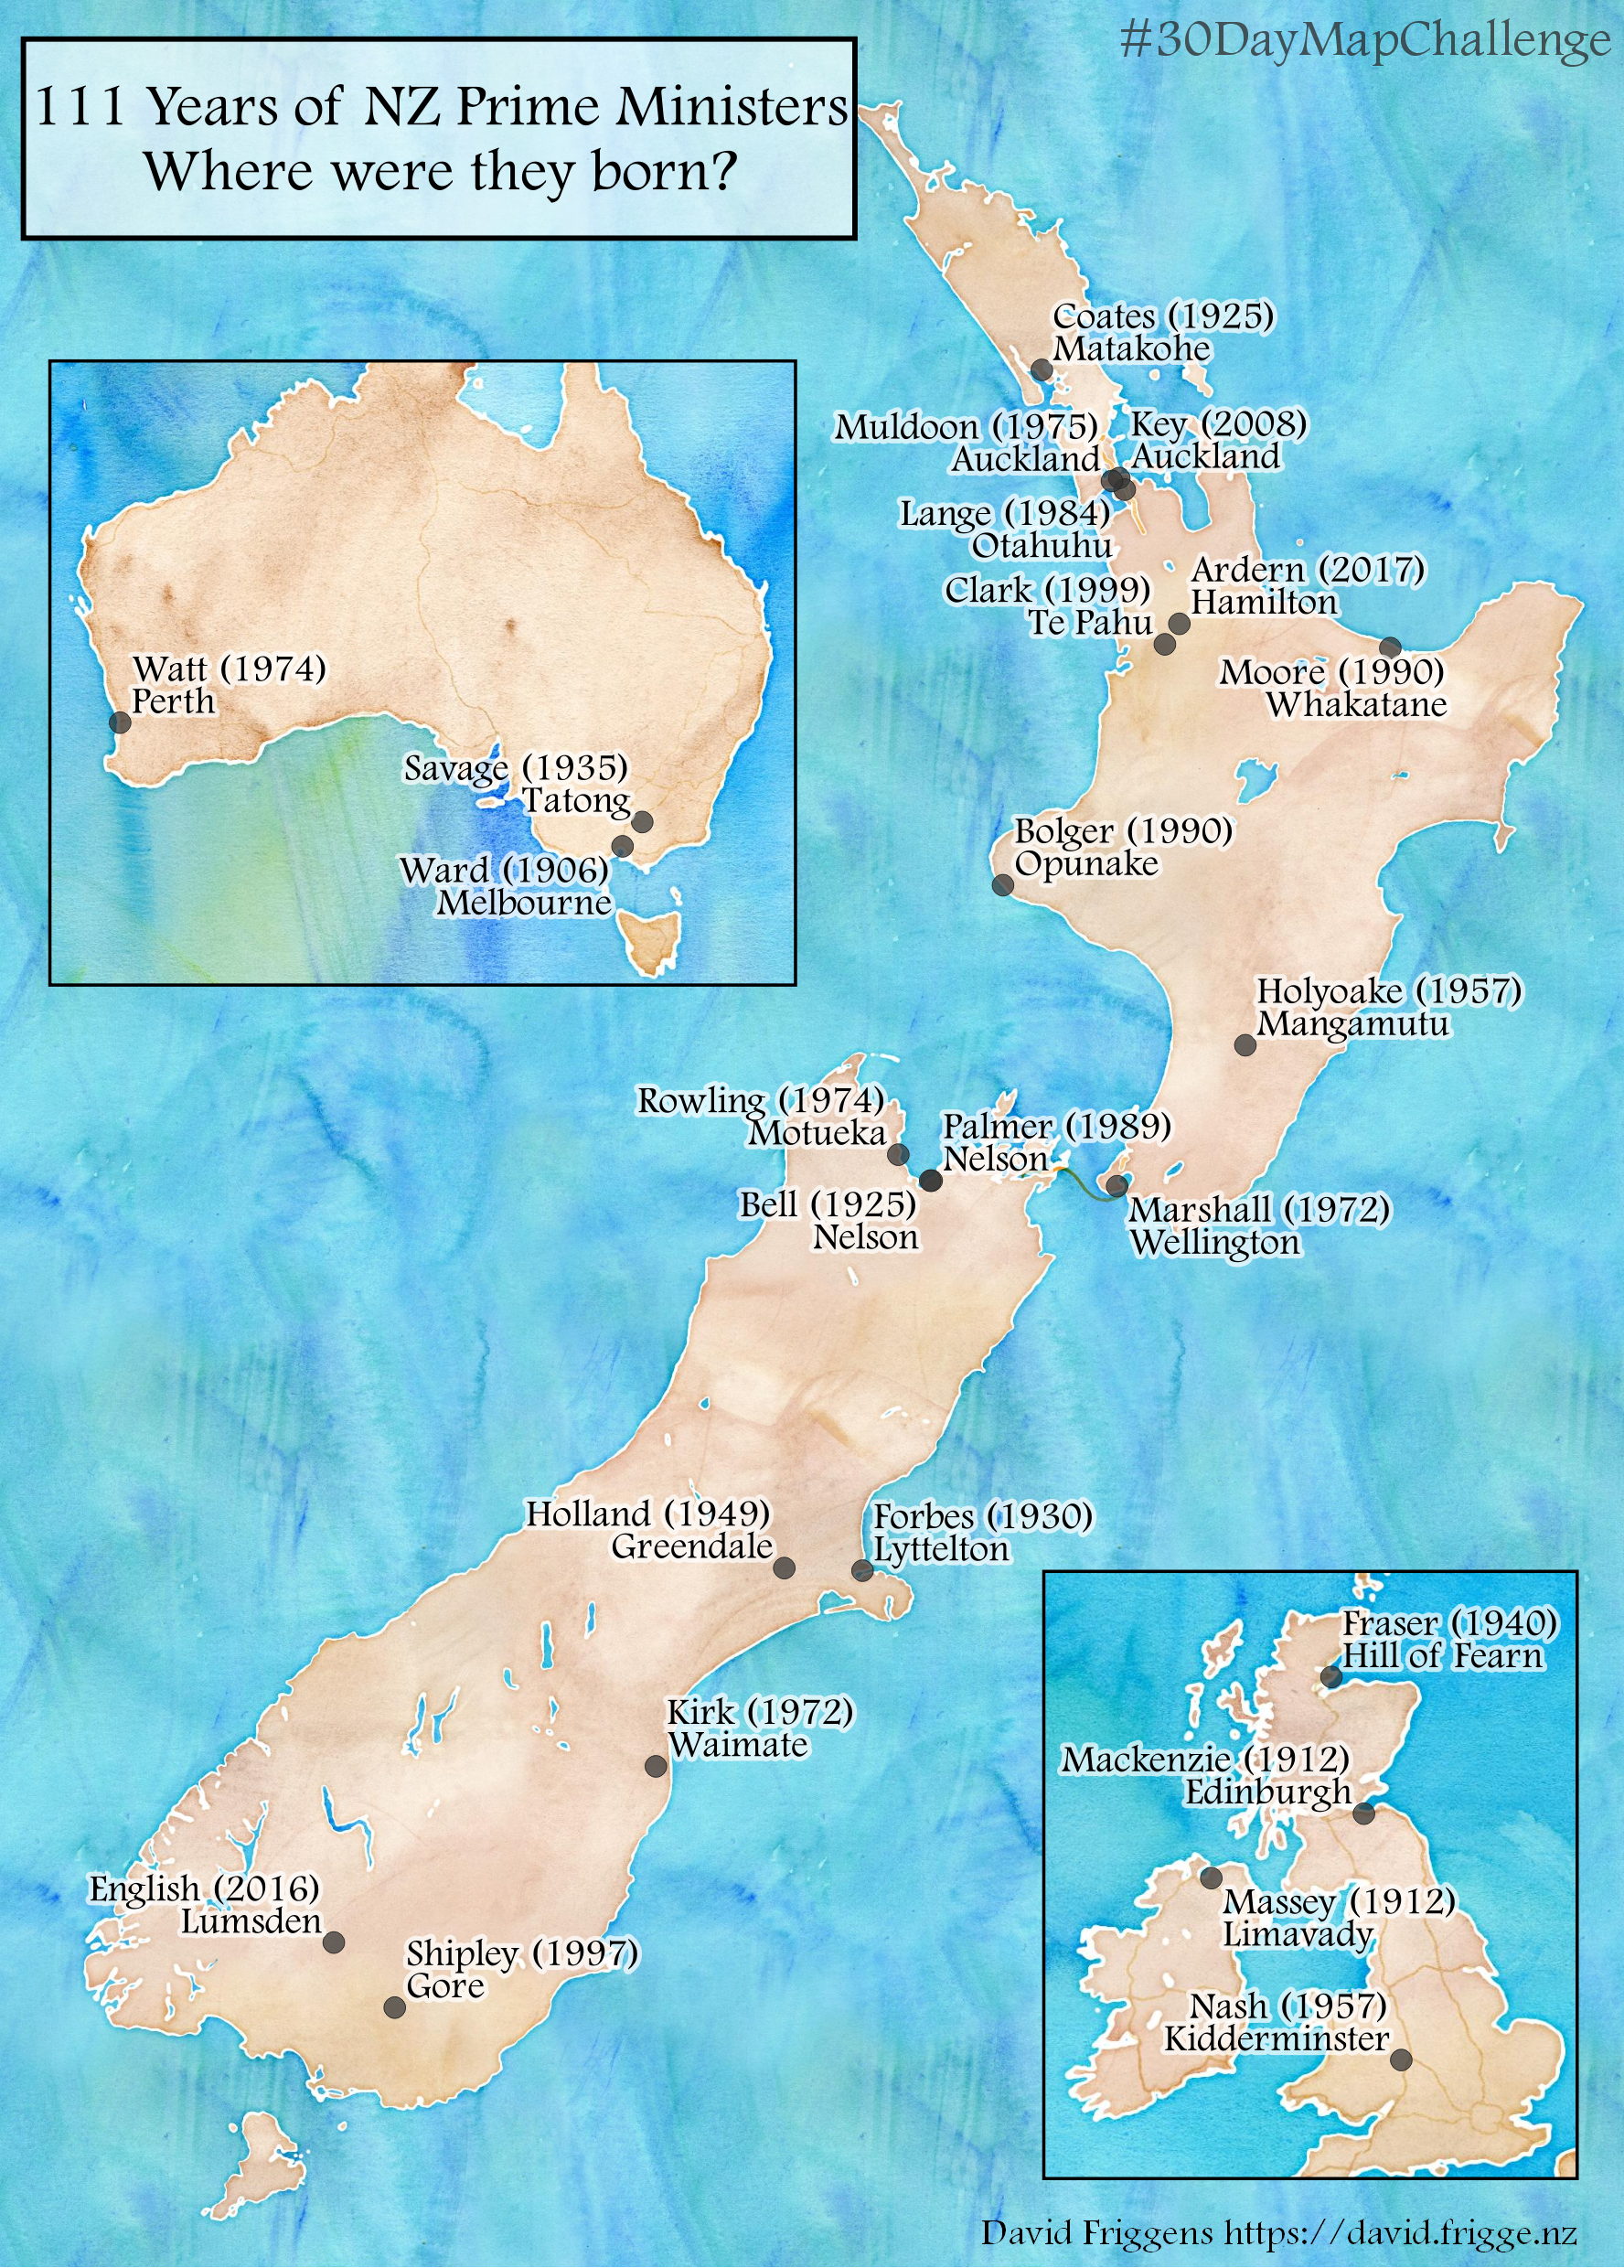 map of NZ prime ministers birthplaces